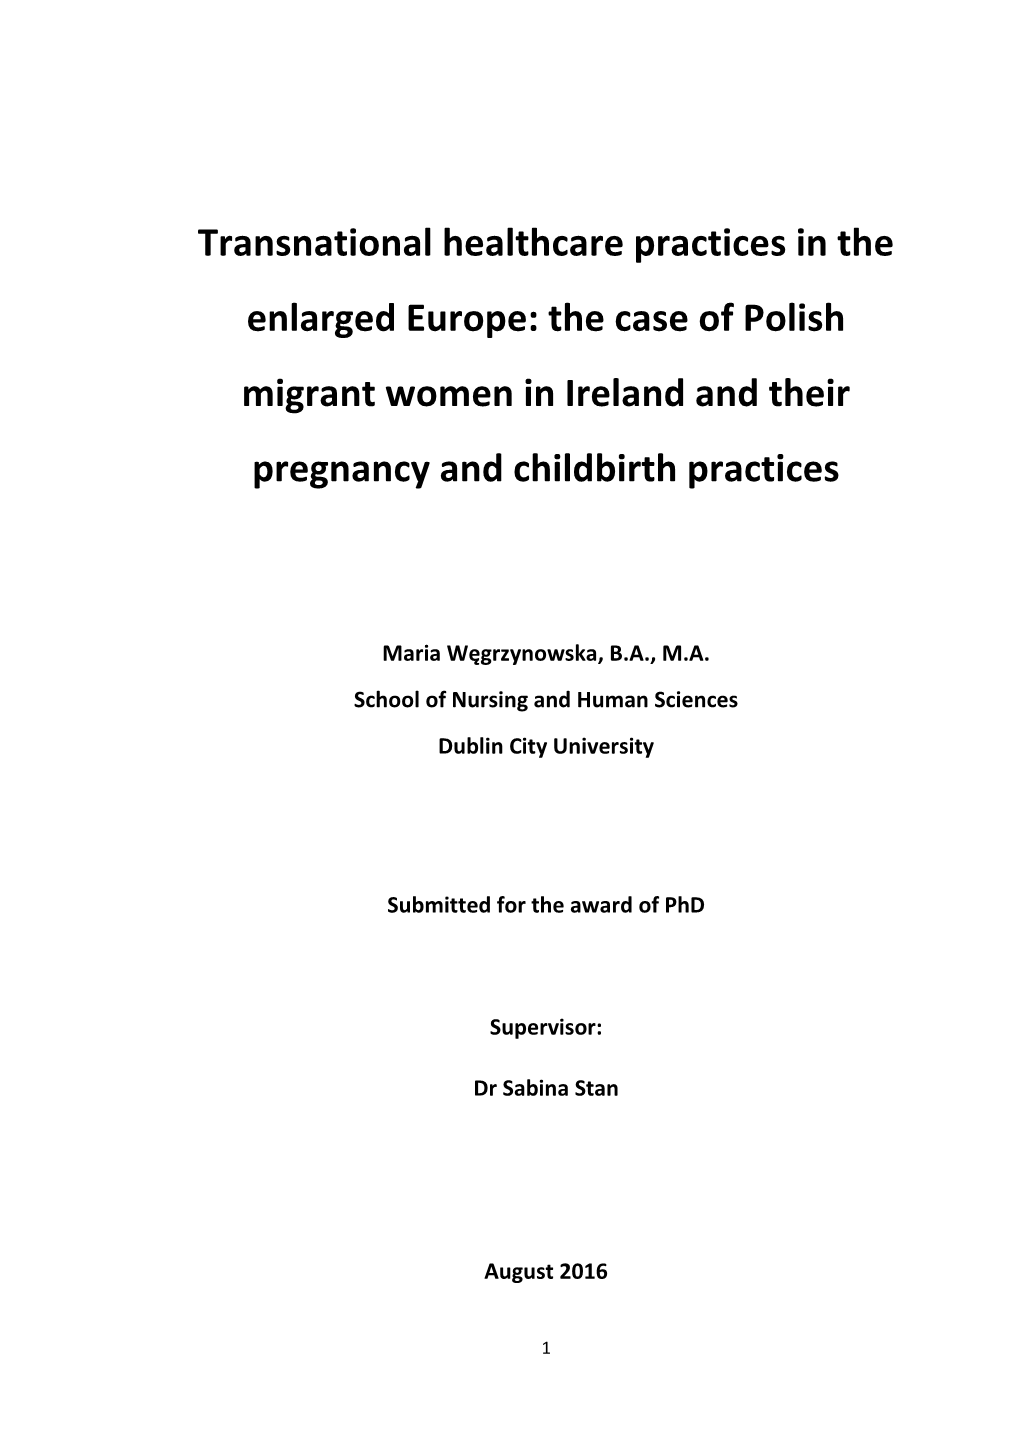 Transnational Healthcare Practices in the Enlarged Europe: the Case of Polish Migrant Women in Ireland and Their Pregnancy and Childbirth Practices